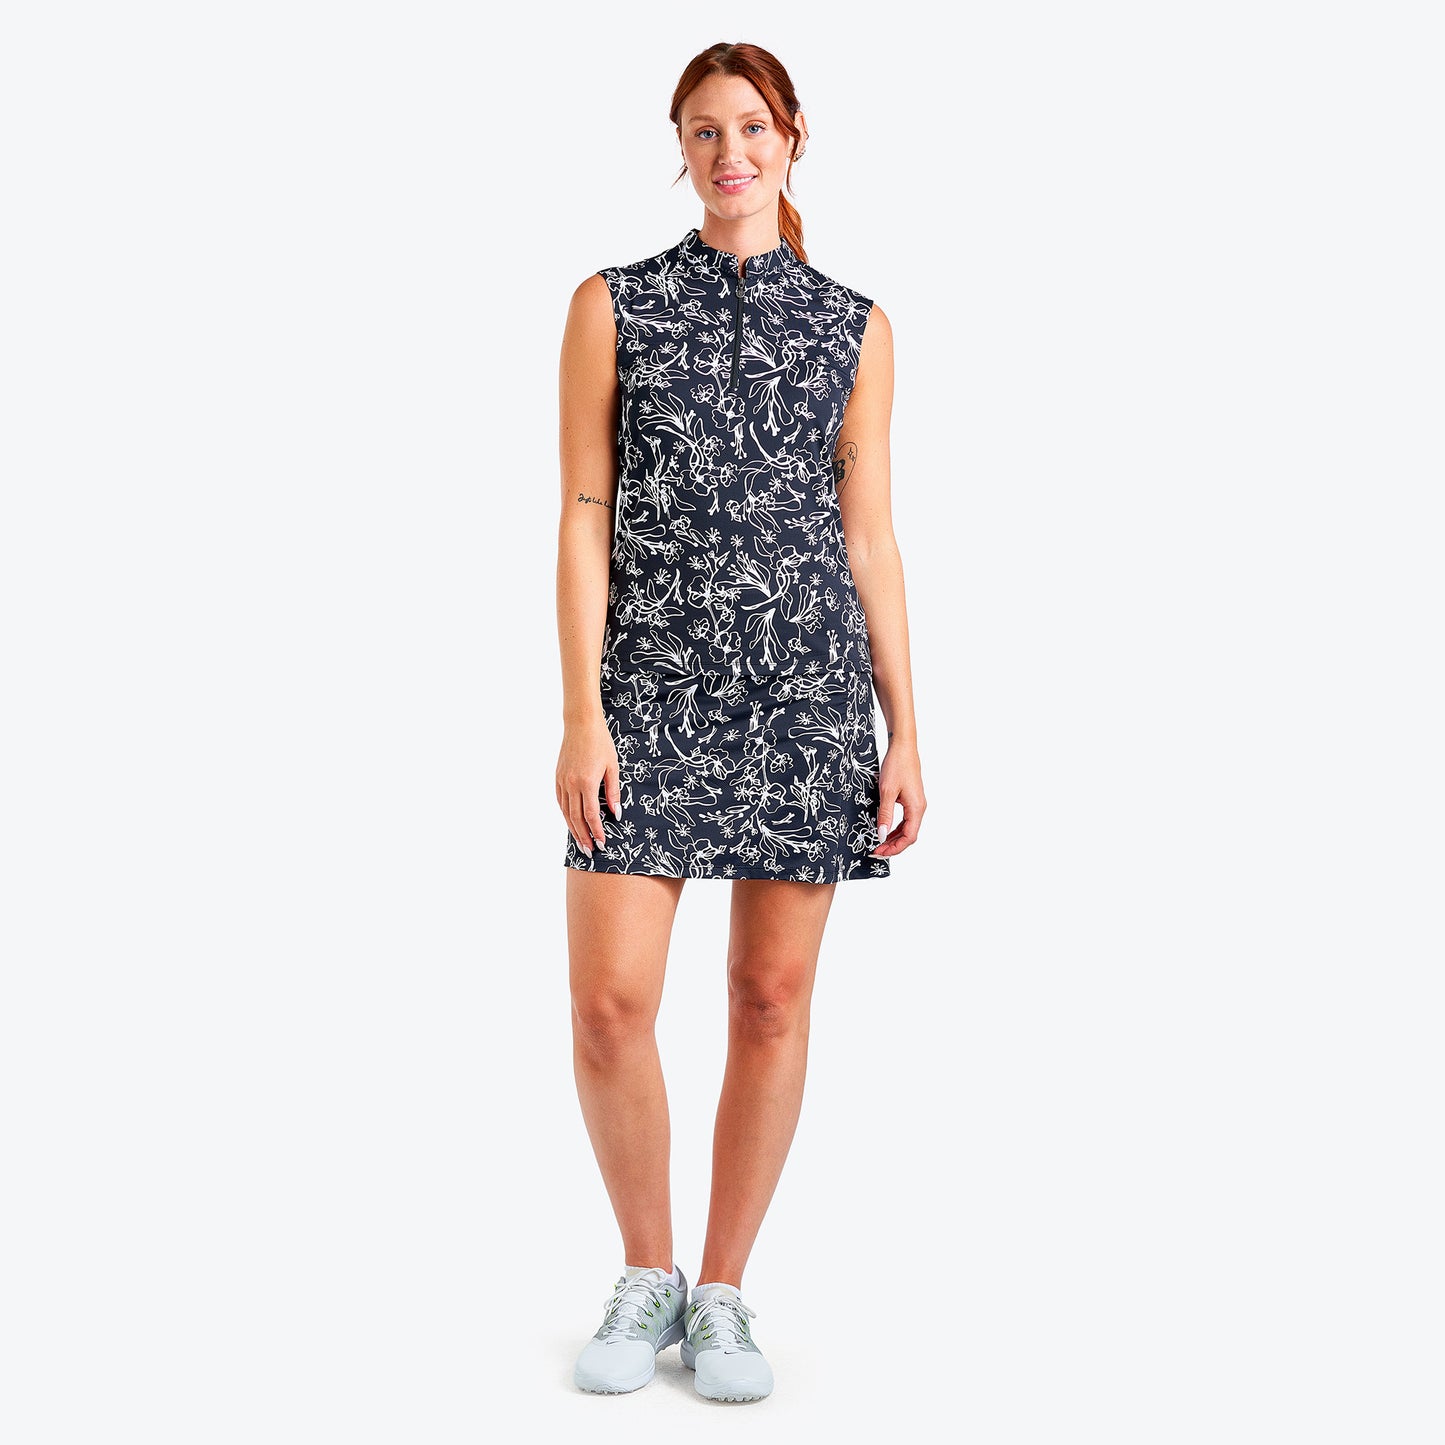 Nivo Ladies Sleeveless Liv-Cool Dress in Black with White Abstract Floral Print